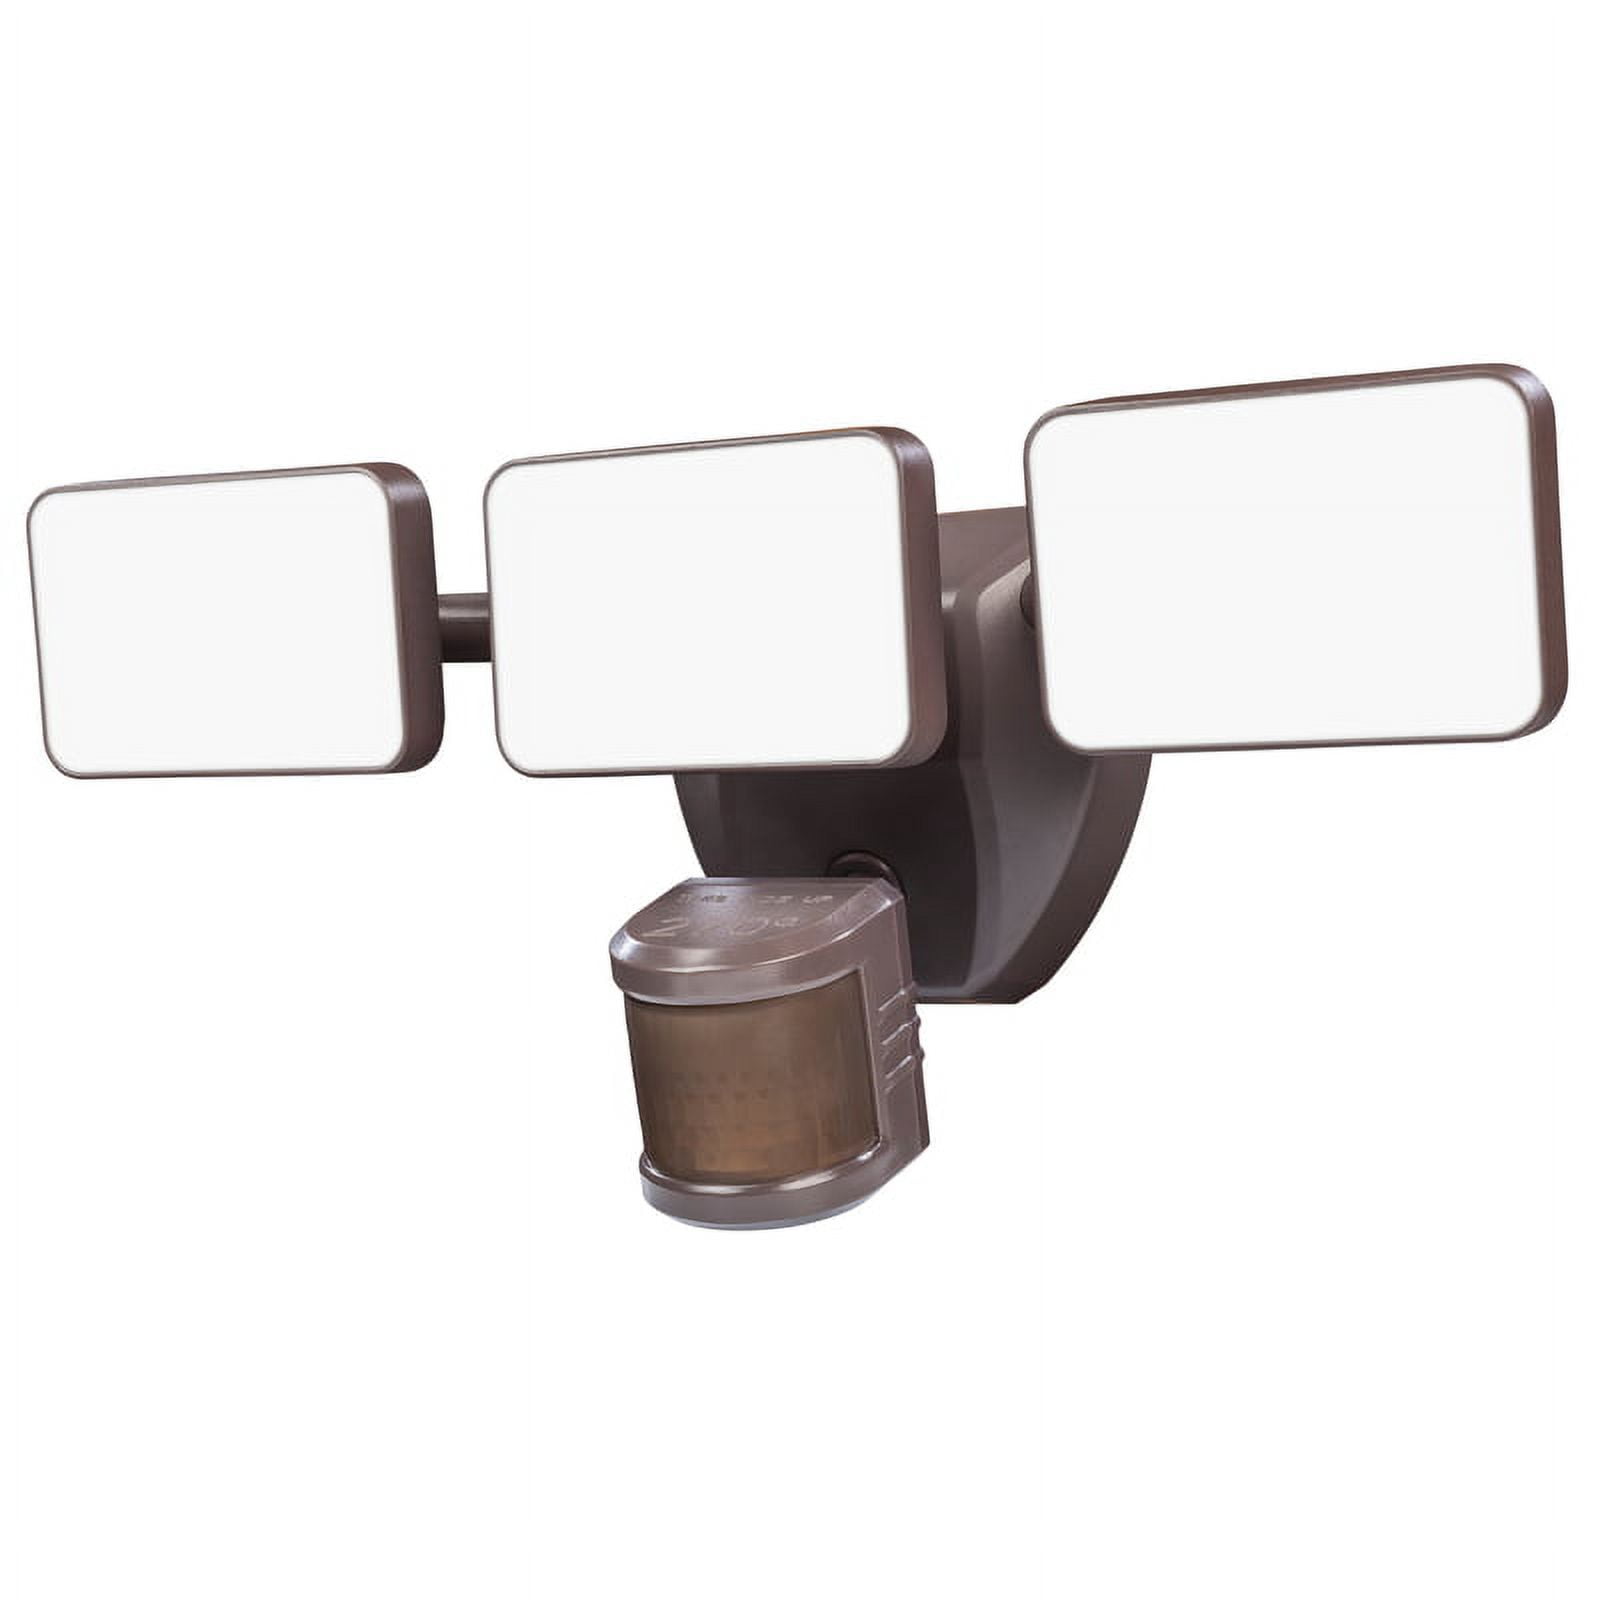 Picture of Heath Zenith 3002781 Hzconnect Wi-Fi Smart Home Motion-Sensing Hardwired Bronze LED Security Light